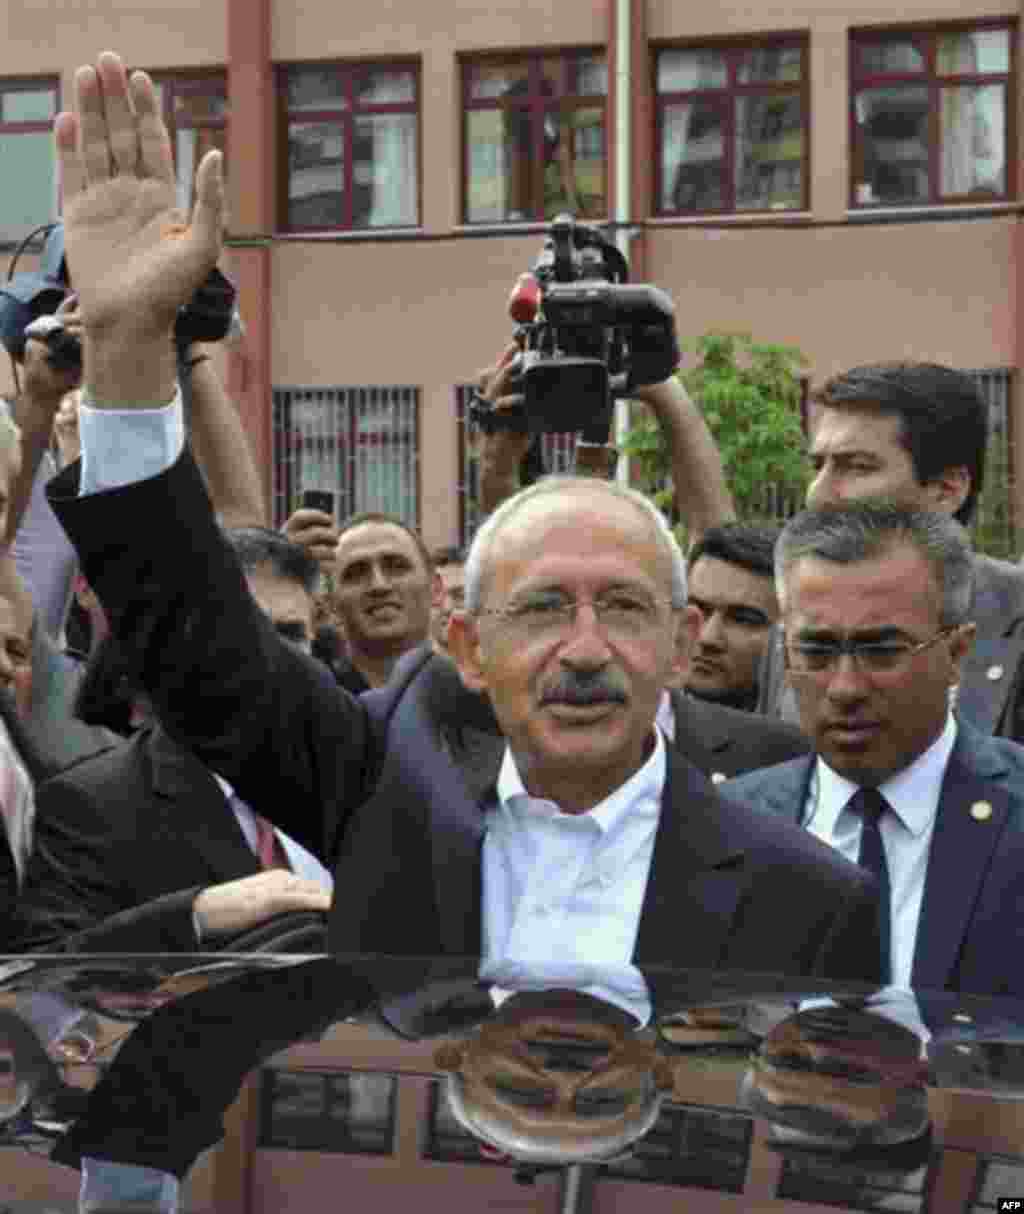 Kemal Kilicdaroglu, the leader of Turkey's main opposition Republican People's Party reacst to cheering supporters after he voted at a polling station in Ankara, Turkey, Sunday, June 12, 2011. Turkey's ruling party sought a third term in elections Sunday,